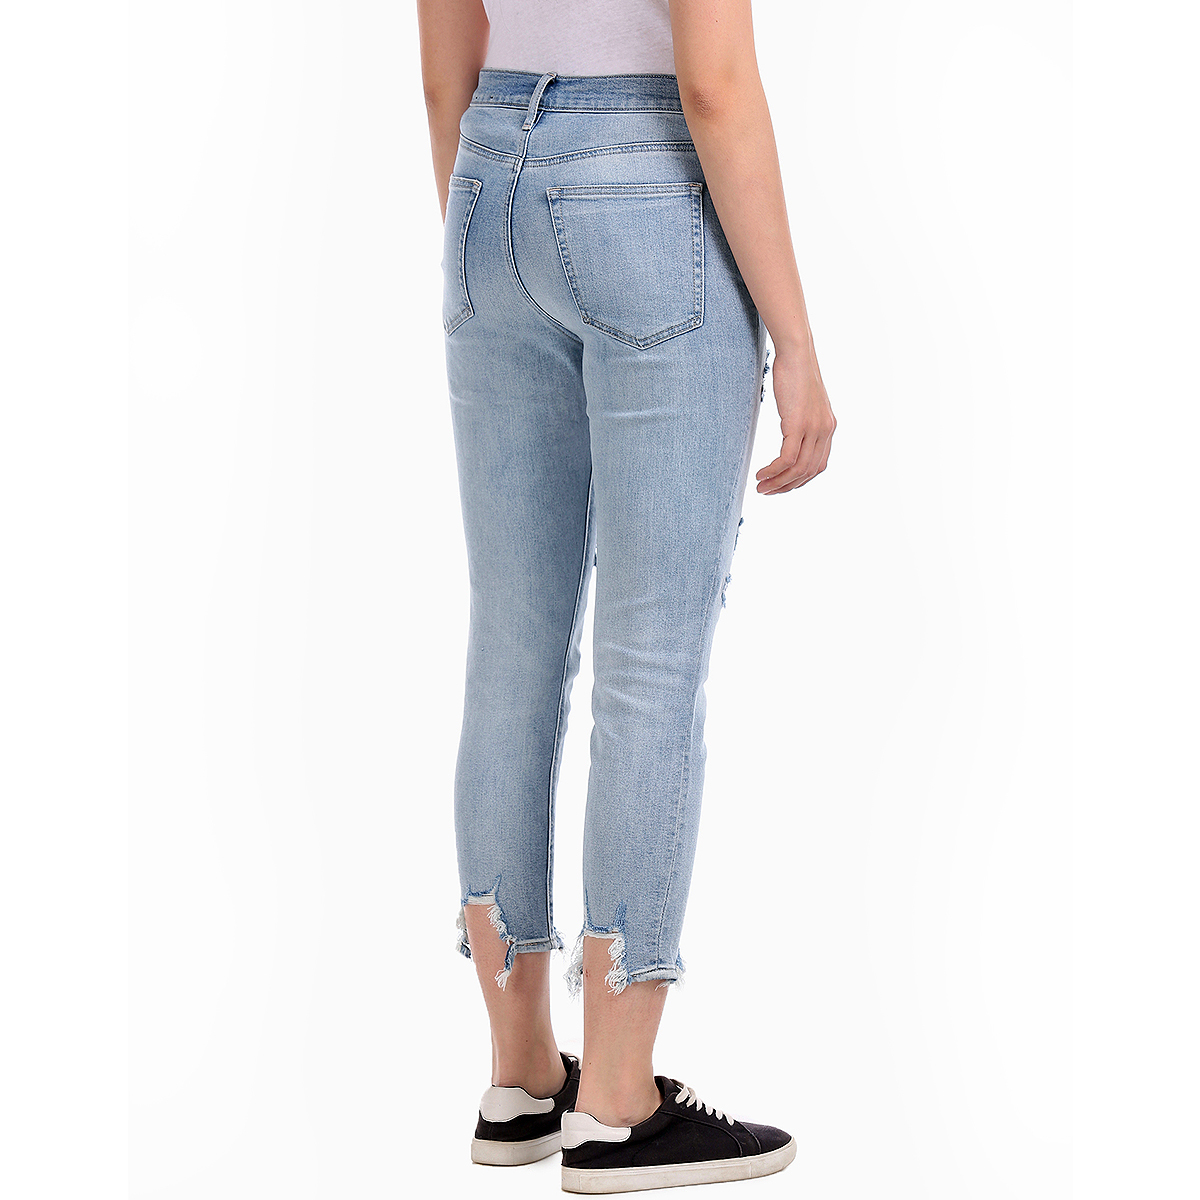 Gap High Rise Skinny Fit Washed Jeans Styled with Heavy Distress & Raw Hems - Lt. Blue